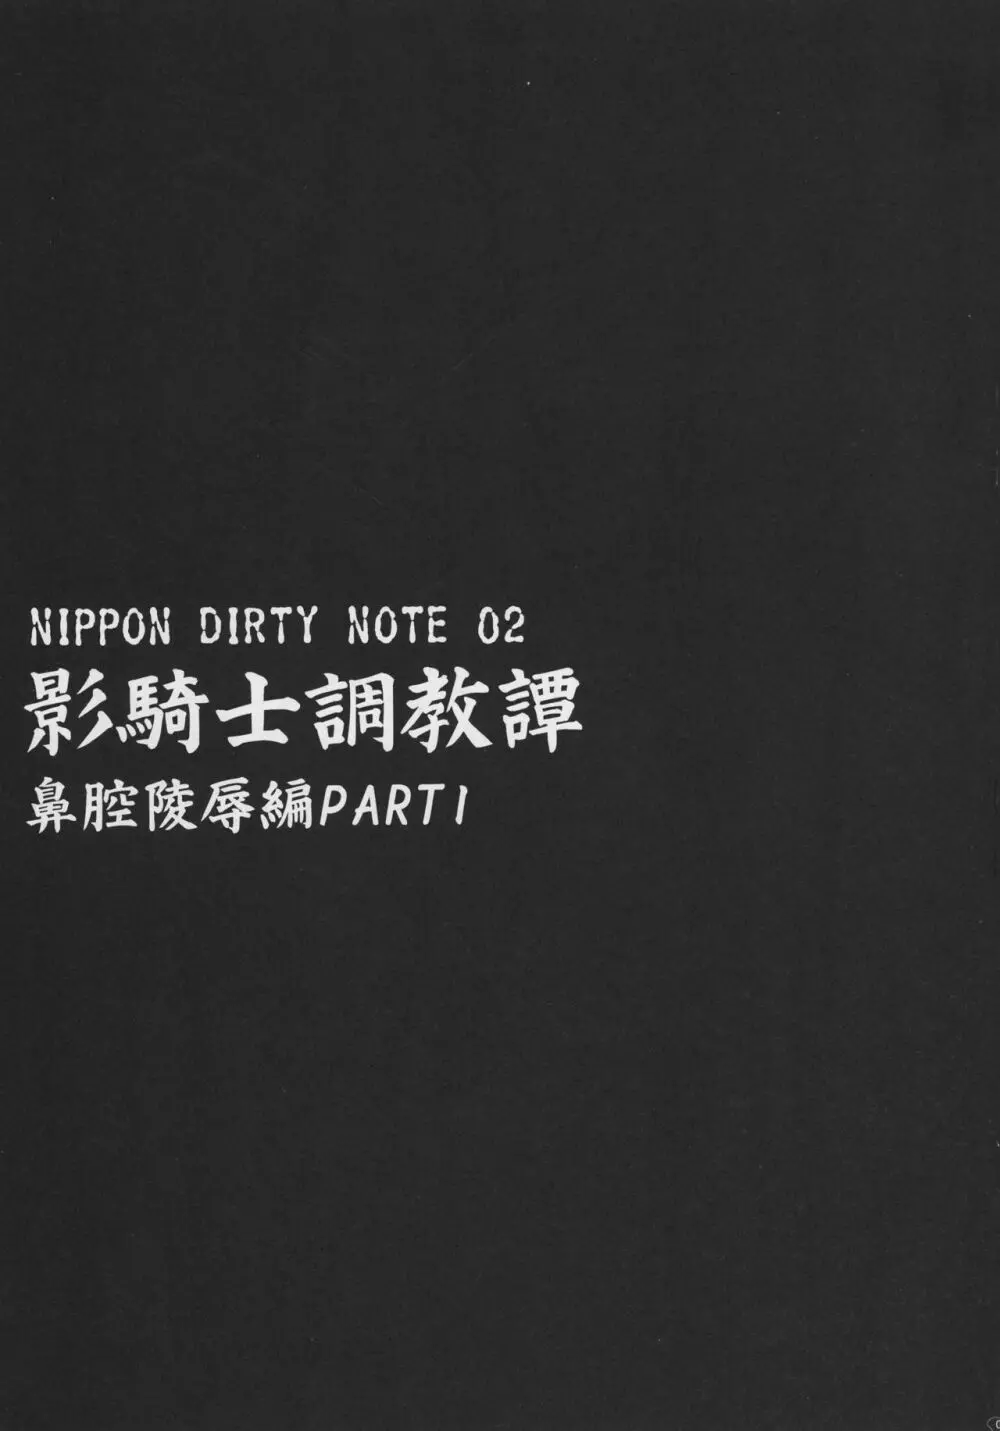 NIPPON DIRTY NOTE 02 9ページ